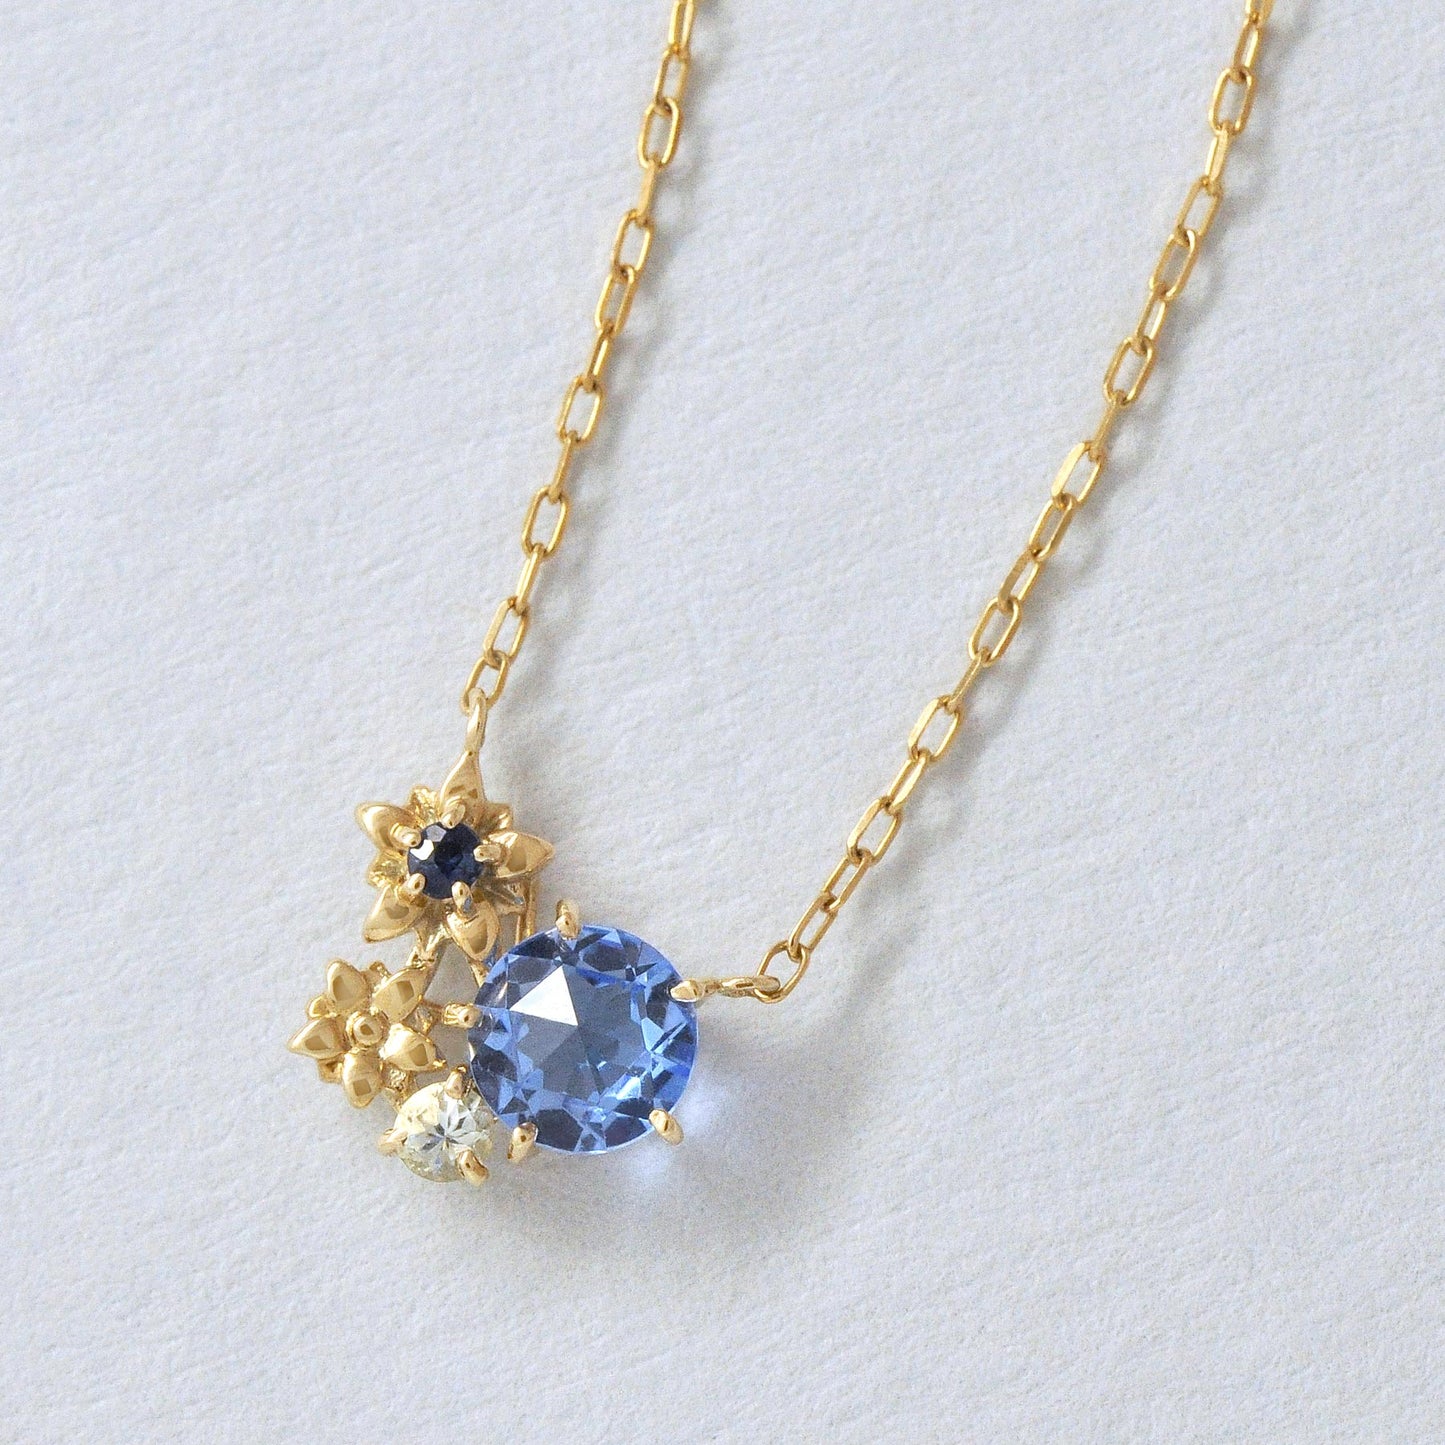 [Birth Flower Jewelry] September Gentian Necklace (Yellow Gold) - Product Image